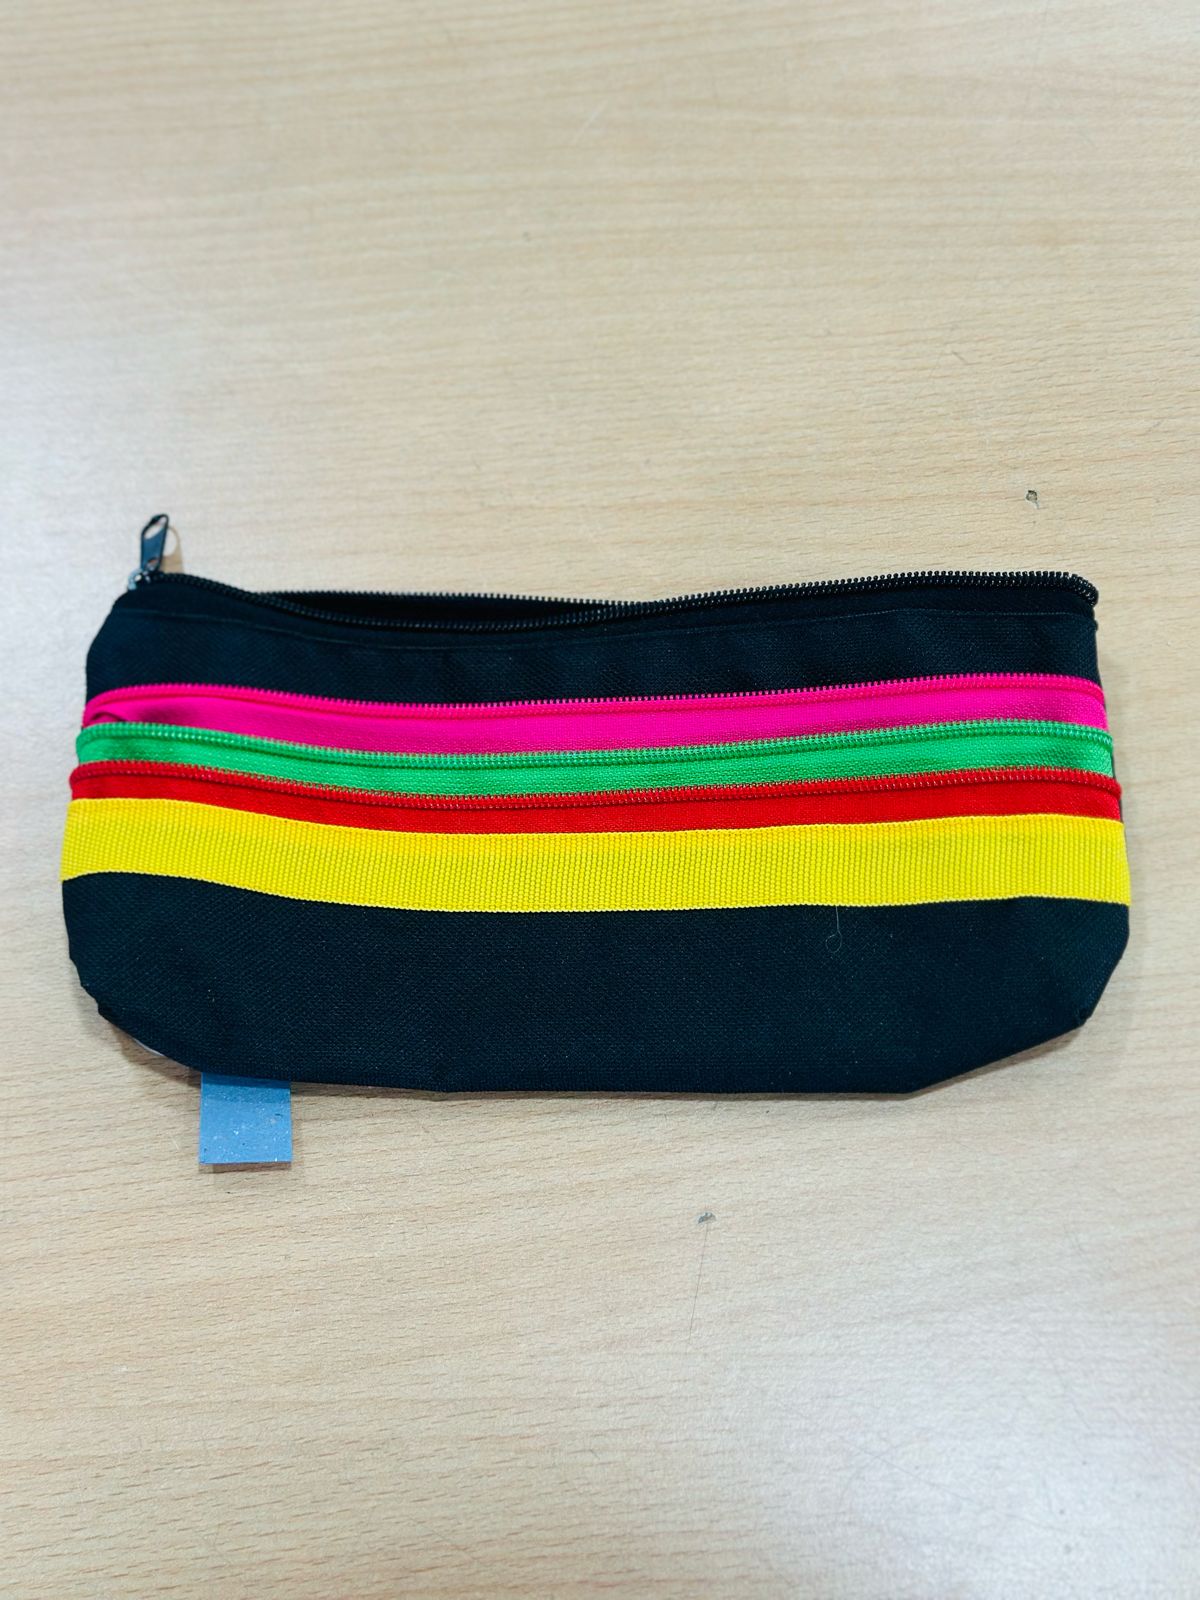 Colorful Pencil Case for Kids